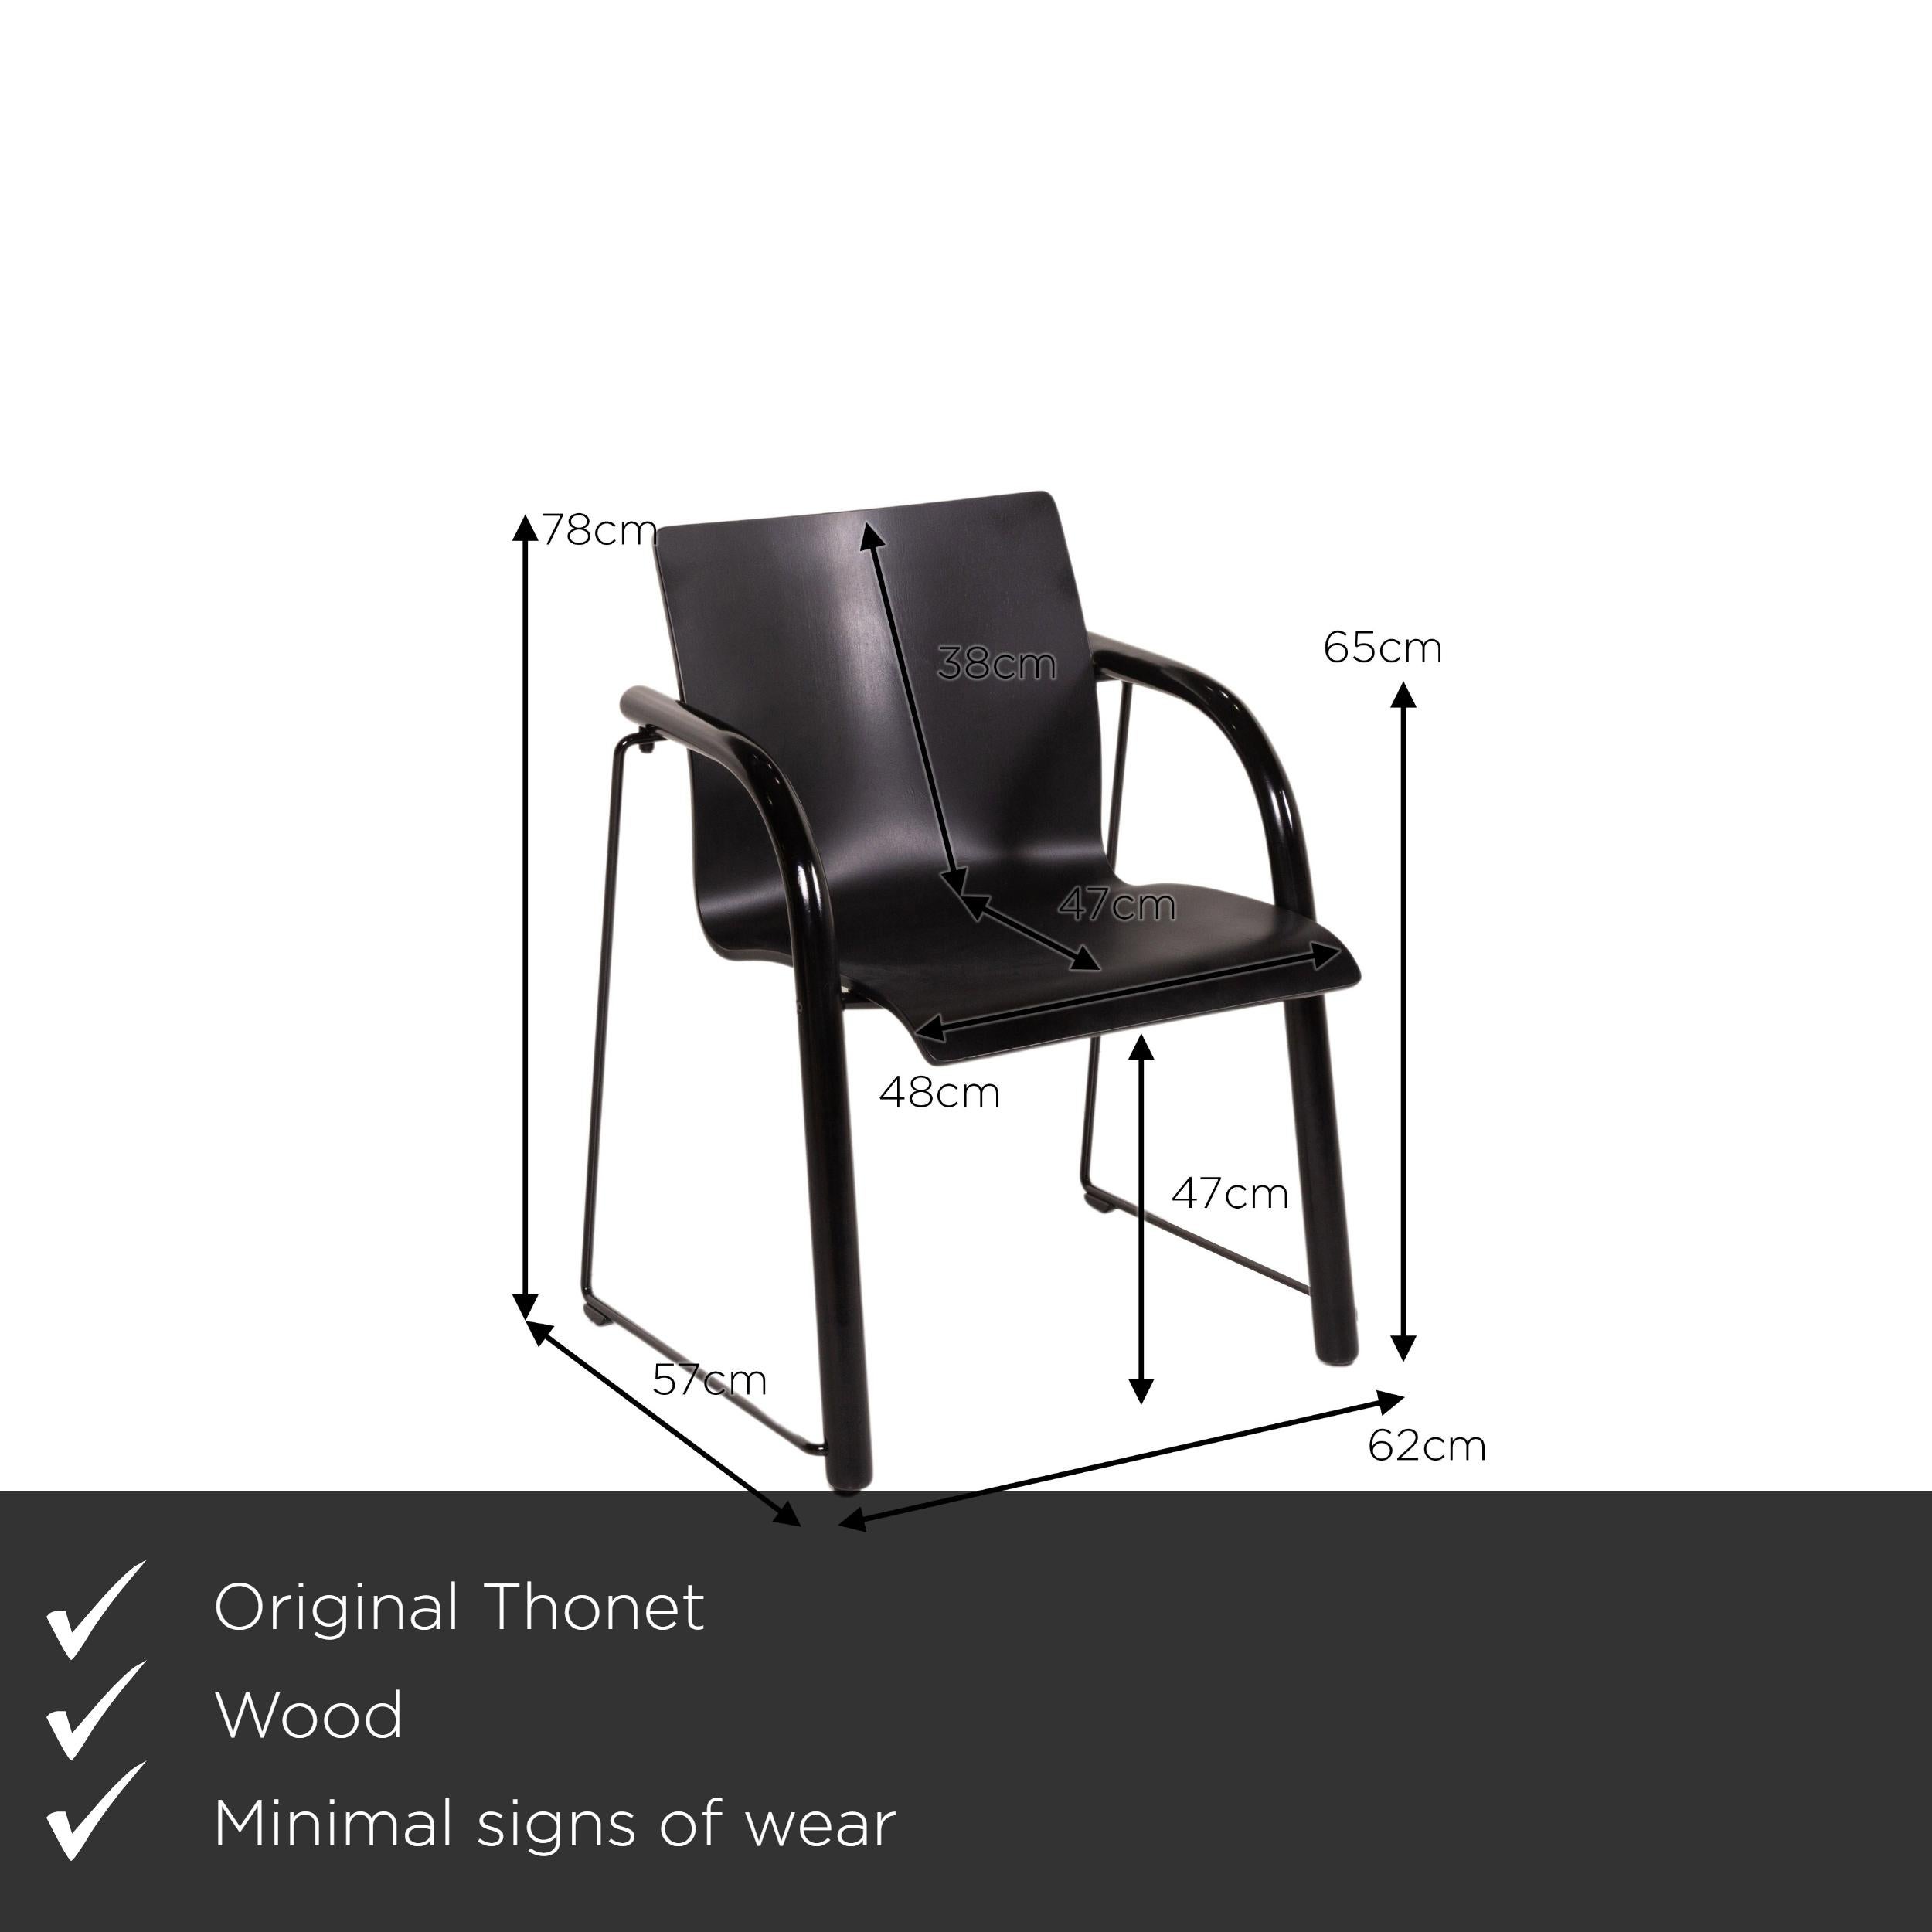 We present to you a Thonet S320 wood chair black.
 
 

 Product measurements in centimeters:
 

 Depth 57
 Width 62
 Height 78
 Seat height 46
 Rest height 65
Seat depth 47
 Seat width 48
Back height 38.